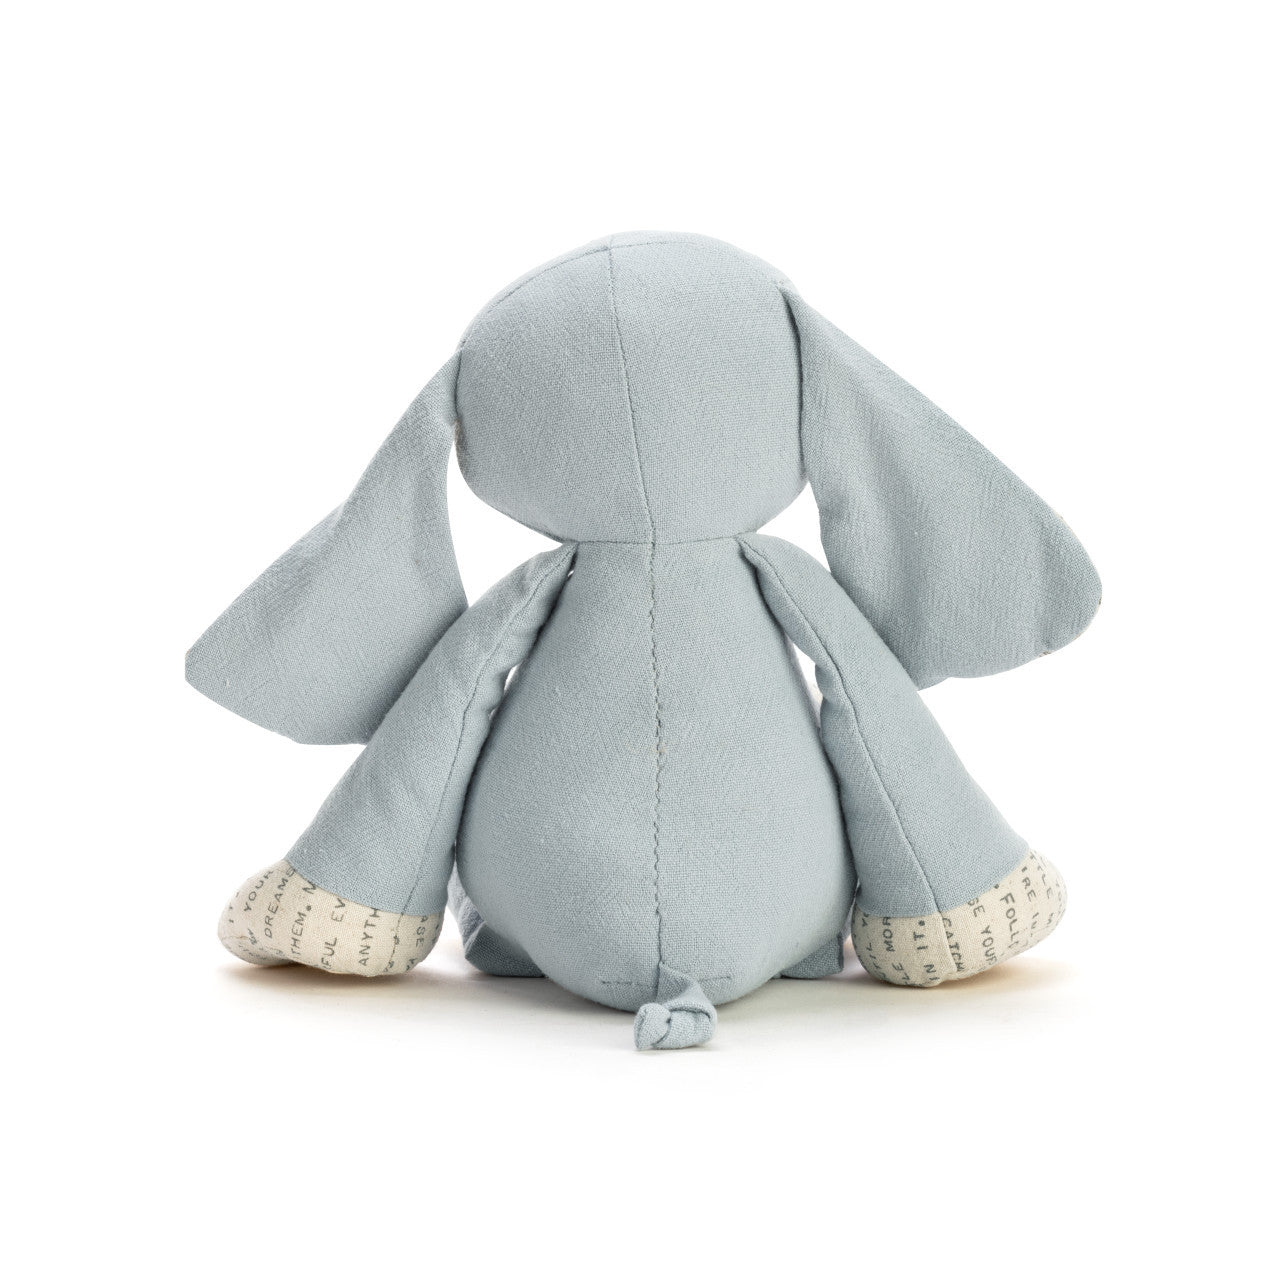 Demdaco Dear Baby - Elephant Plush available at The Good Life Boutique